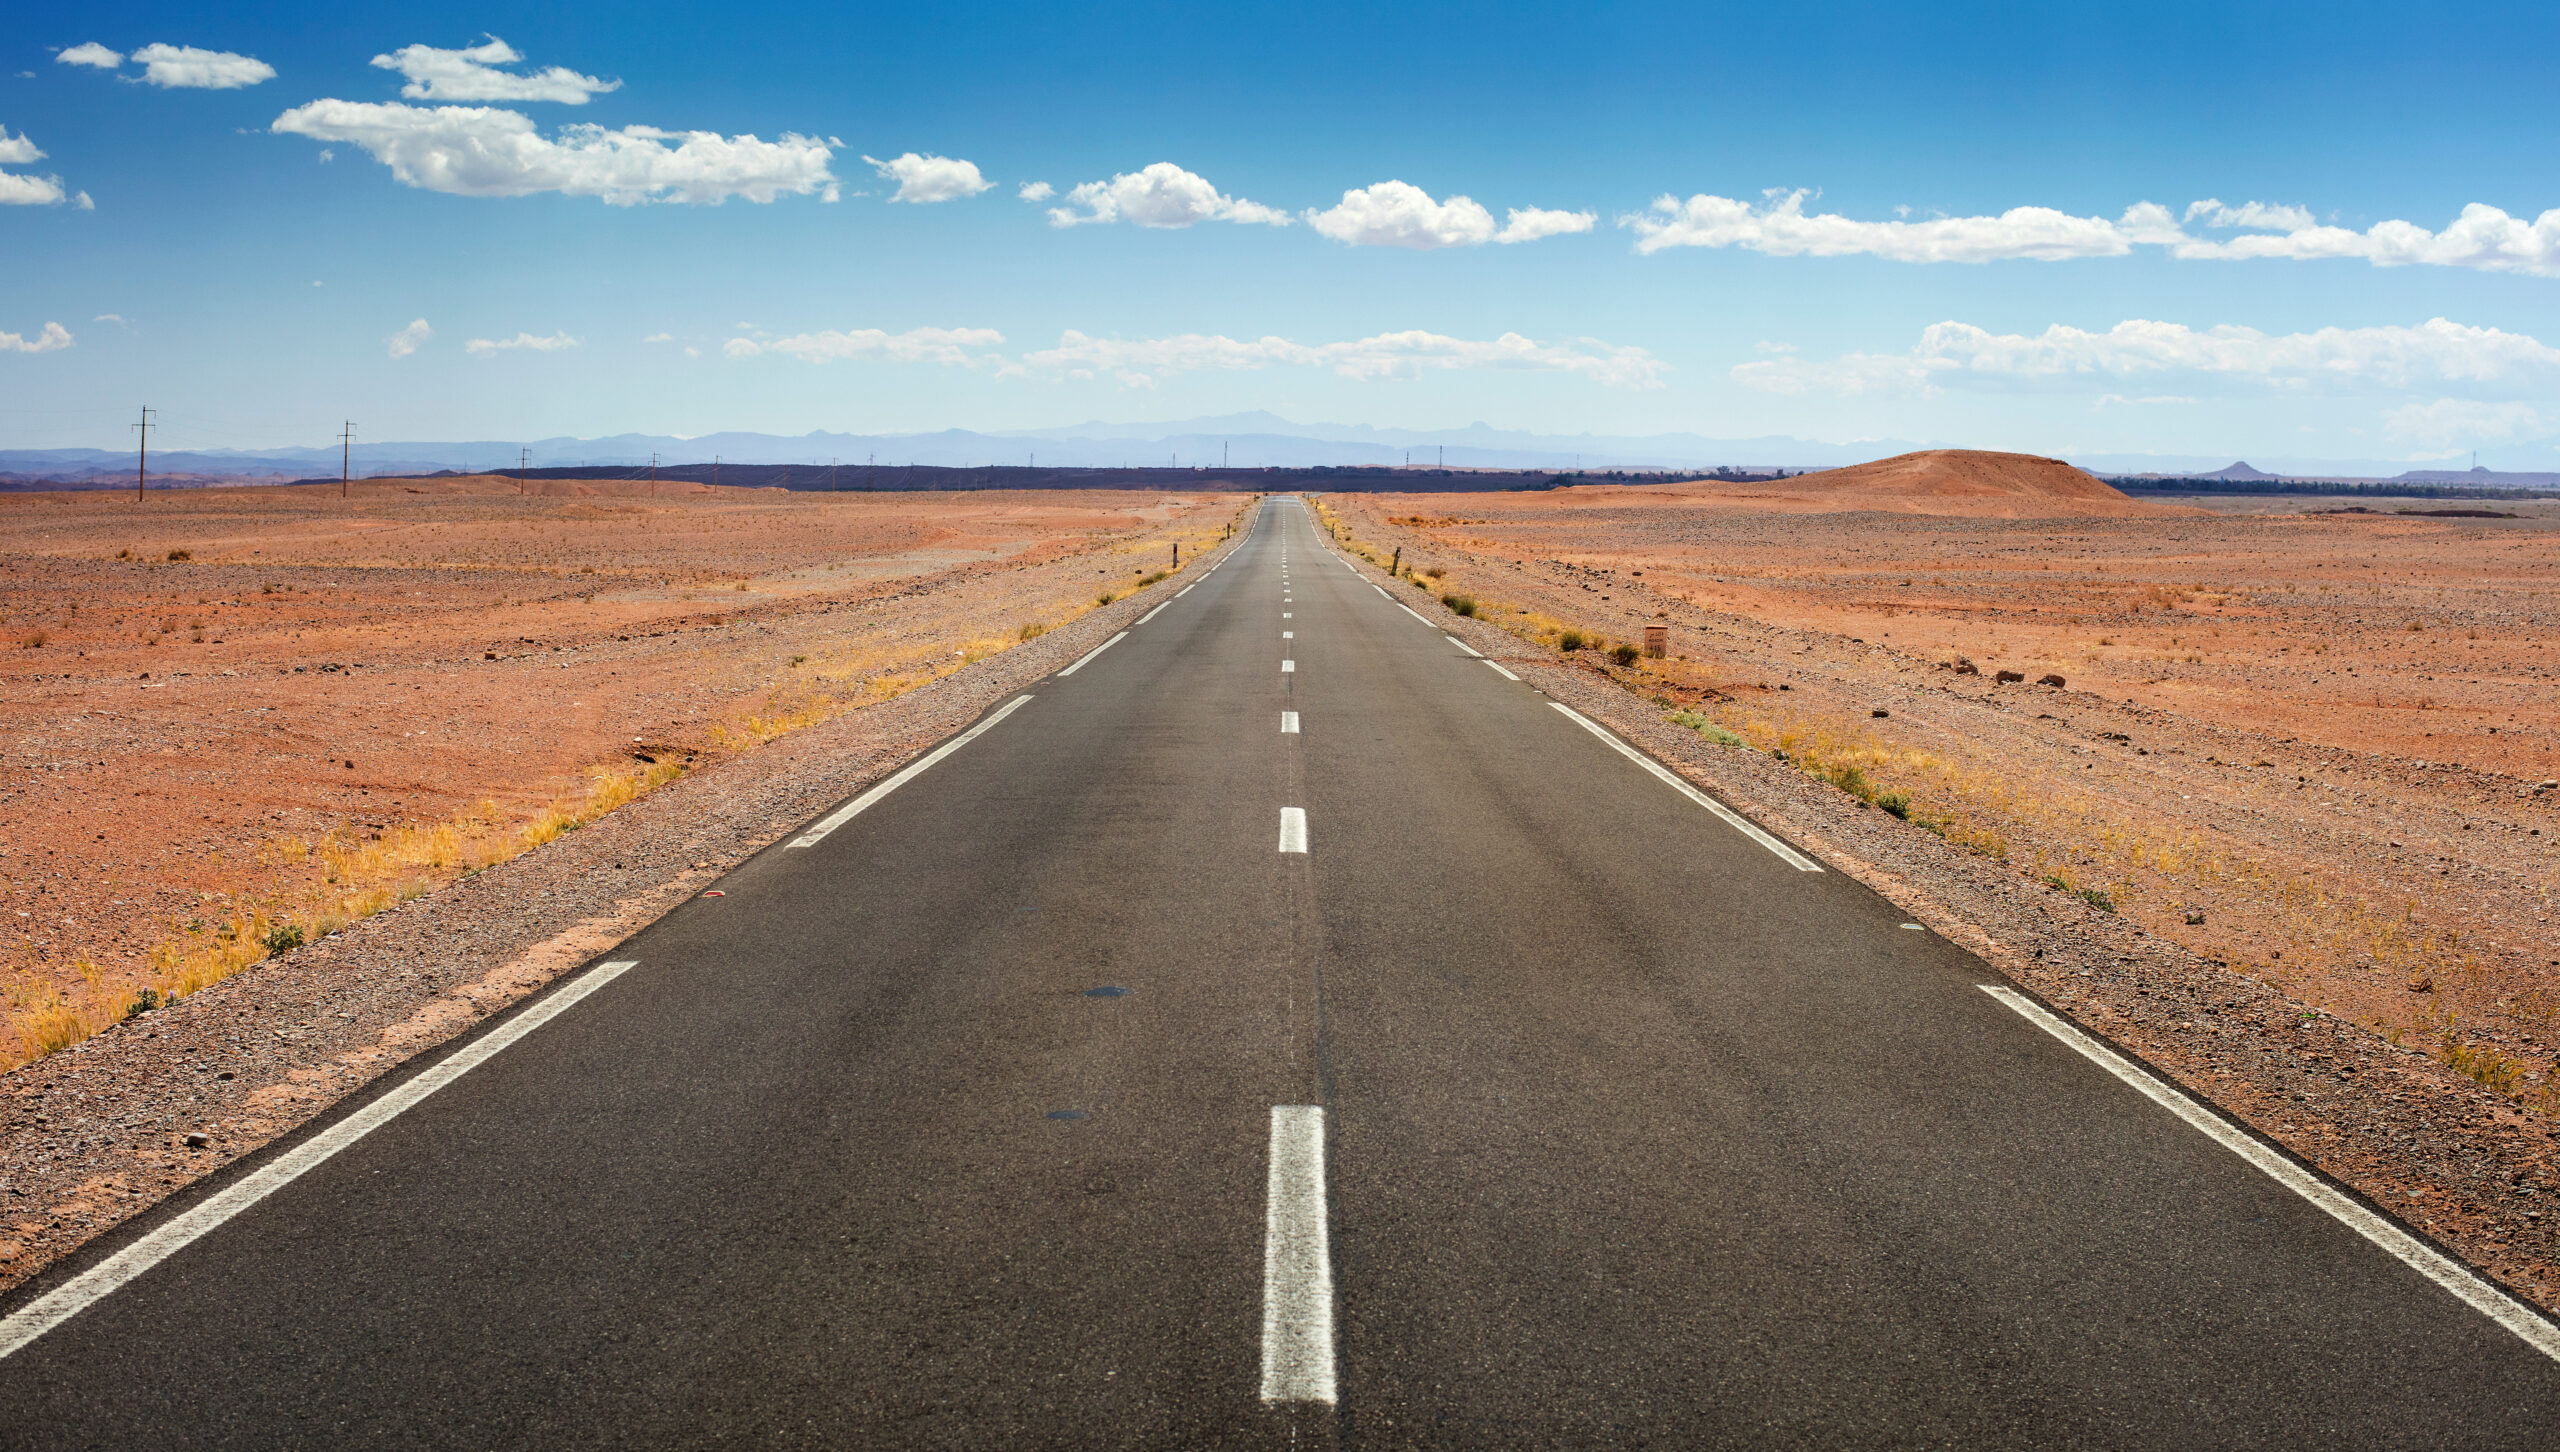 production-services-and-filming-in-marocco-empty-asphalt-desert-road